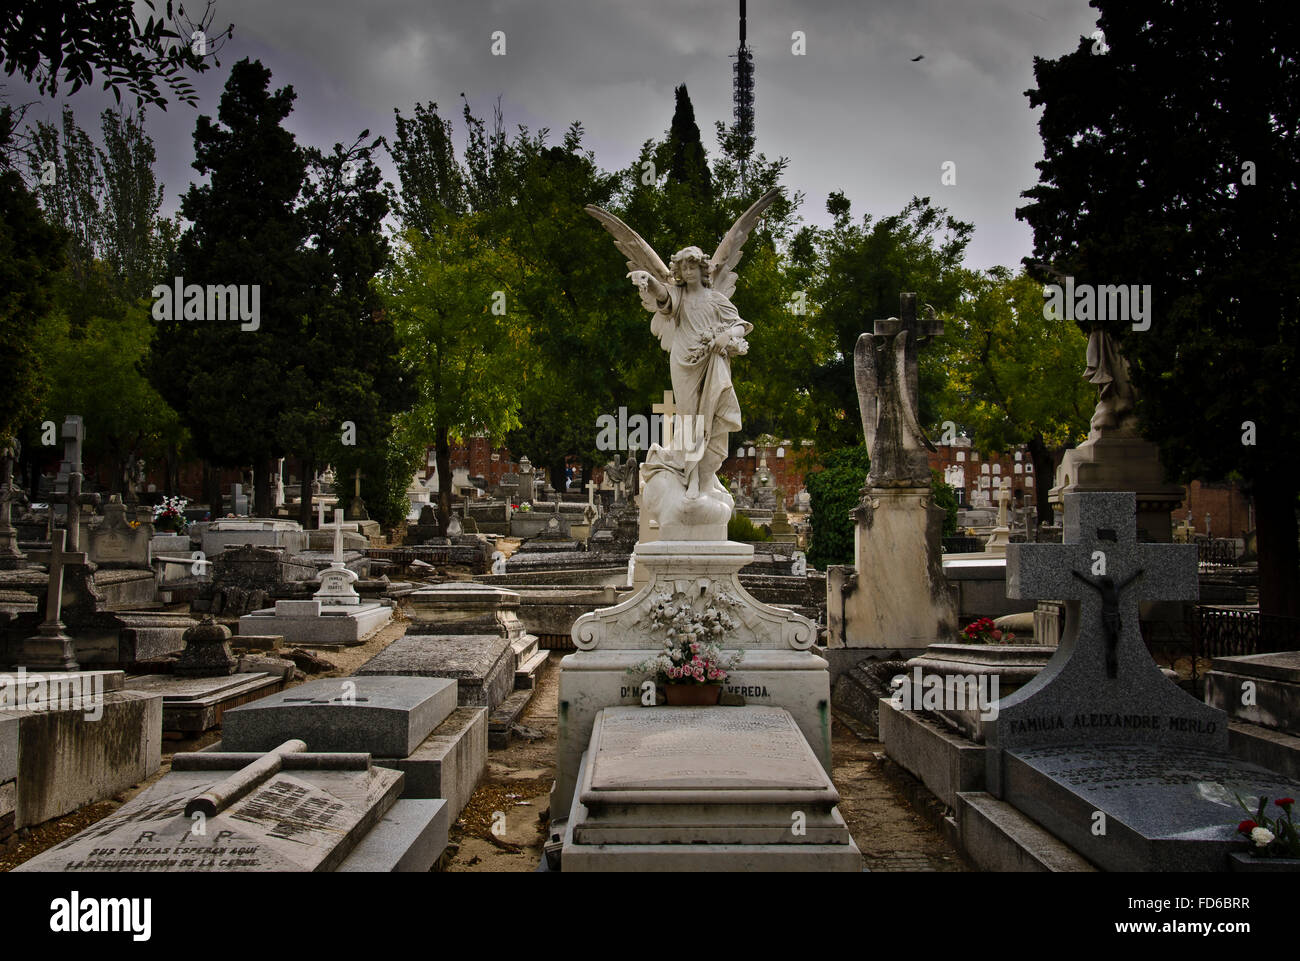 A sculpture angel in Almudena cemetery of Madrid city, Spain Stock Photo